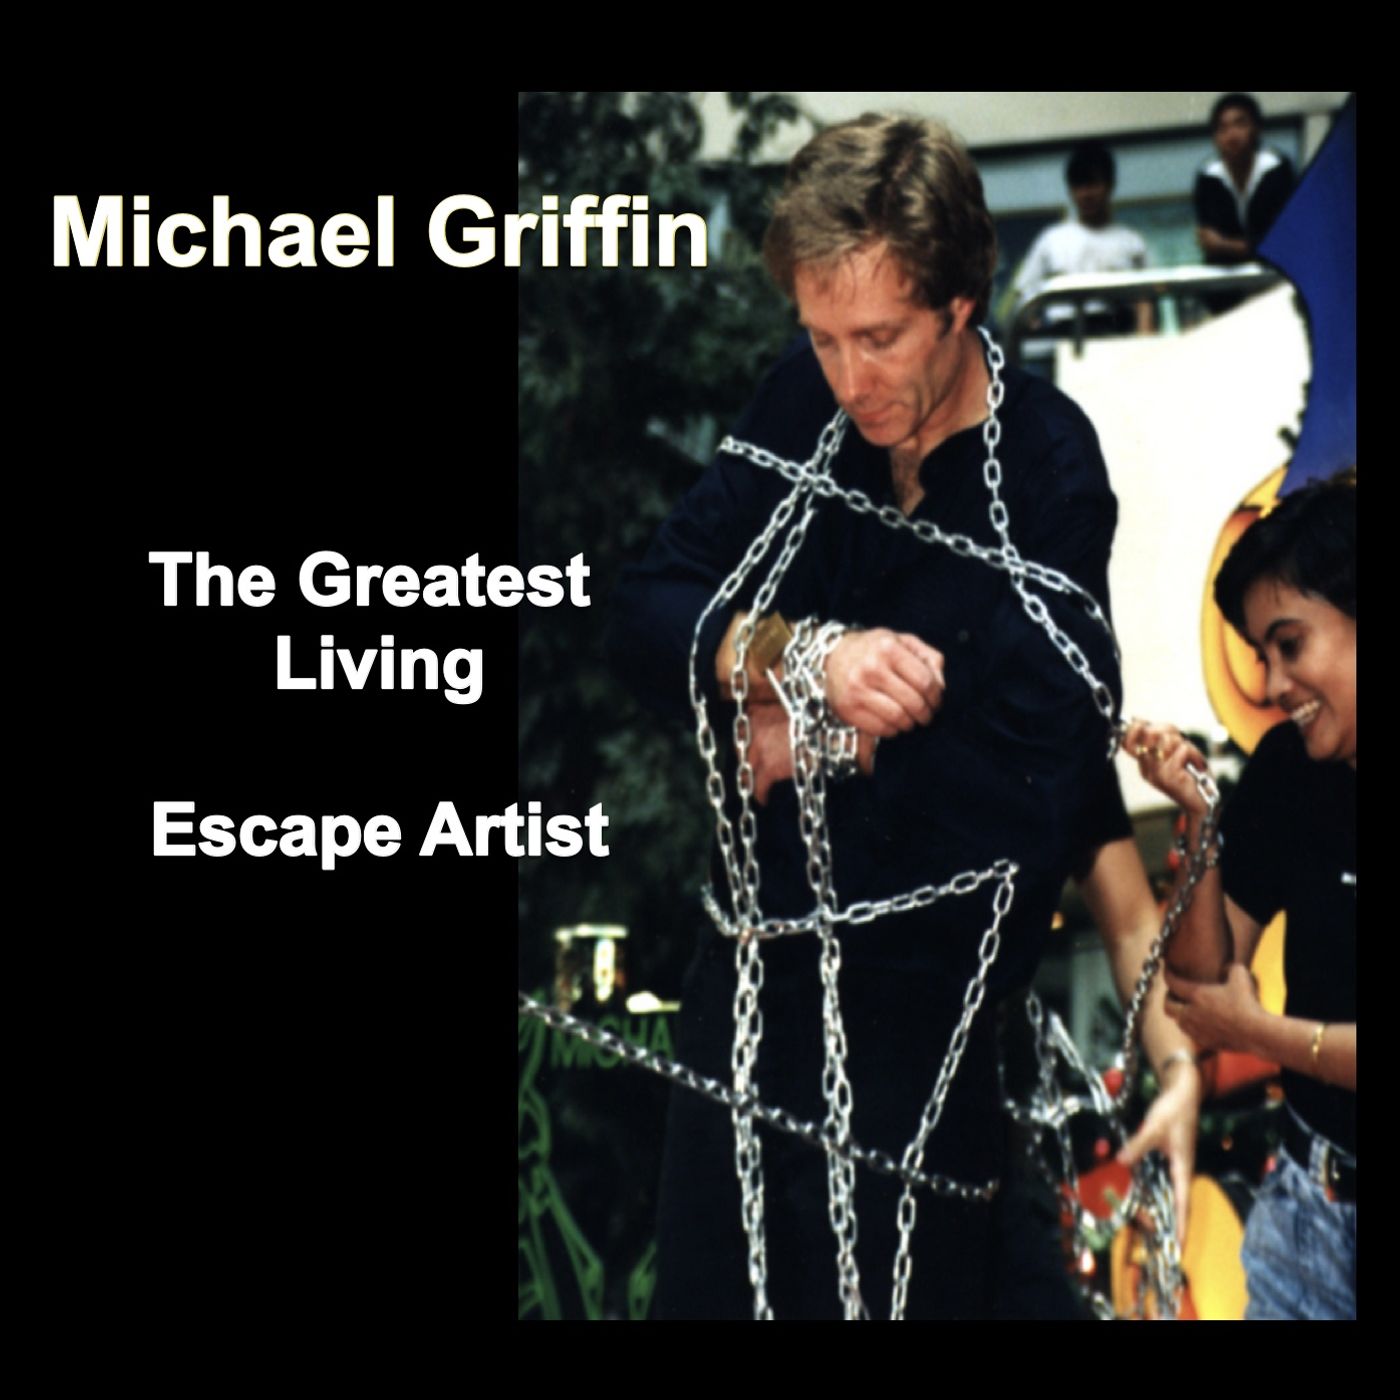 Michael Griffin, Escape Artist presented by Countyfairgrounds